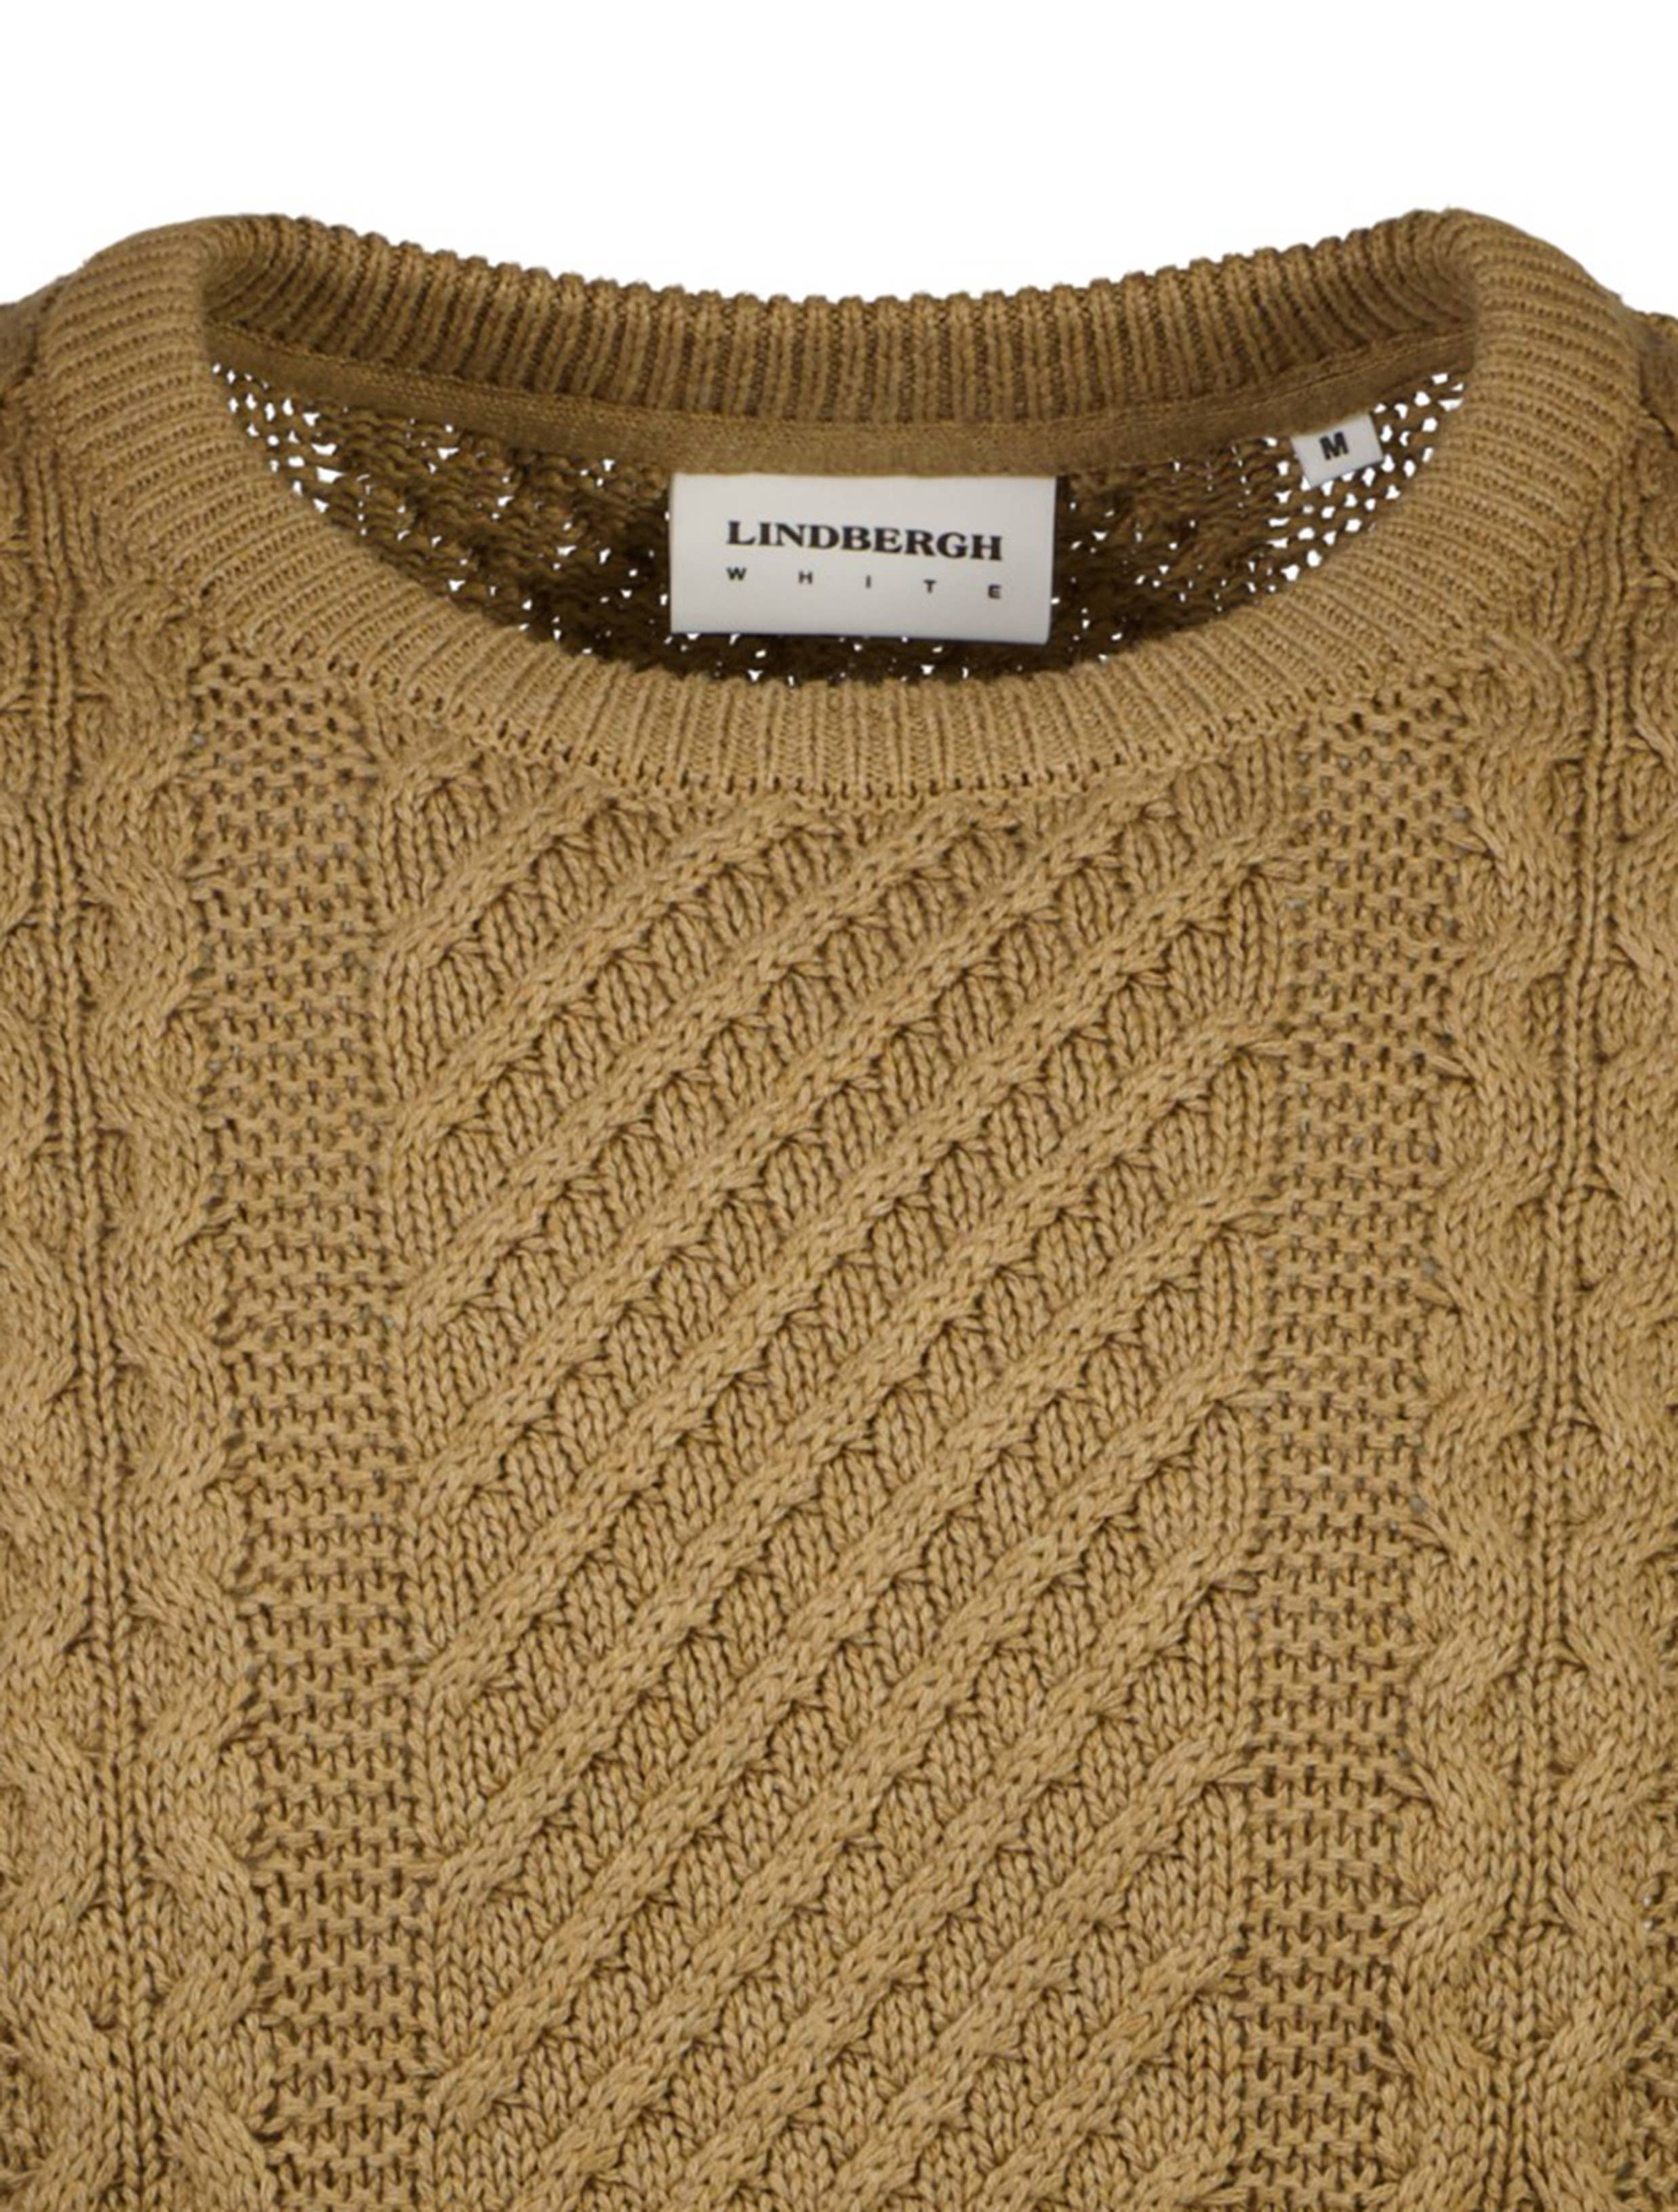 Cable Knit Style Cotton Sweater